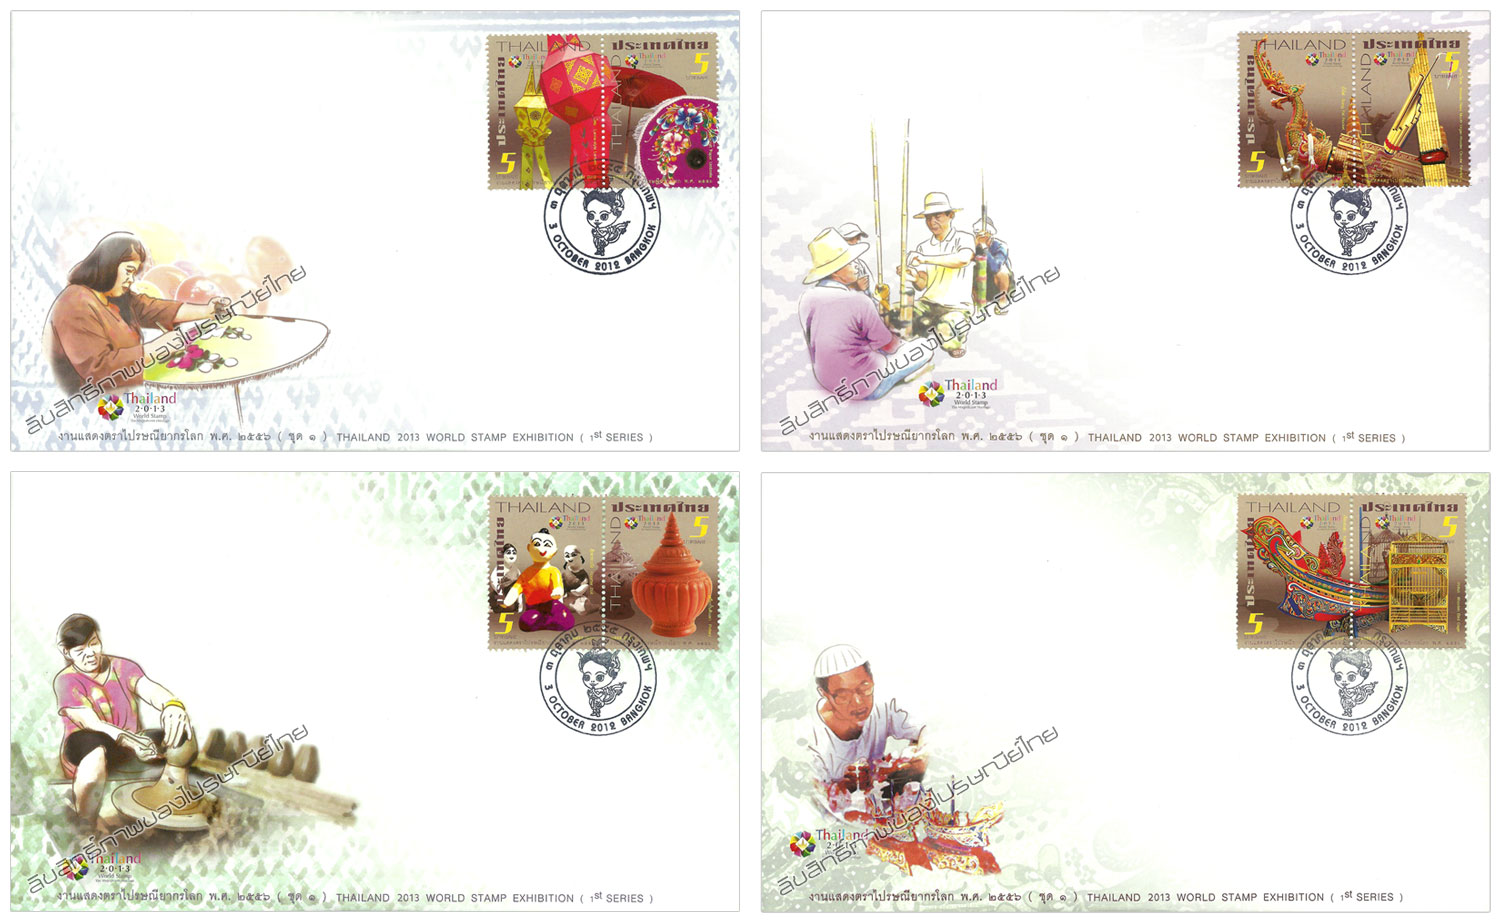 Thailand 2013 World Stamp Exhibition Commemorative Stamps (1st Series) First Day Cover.